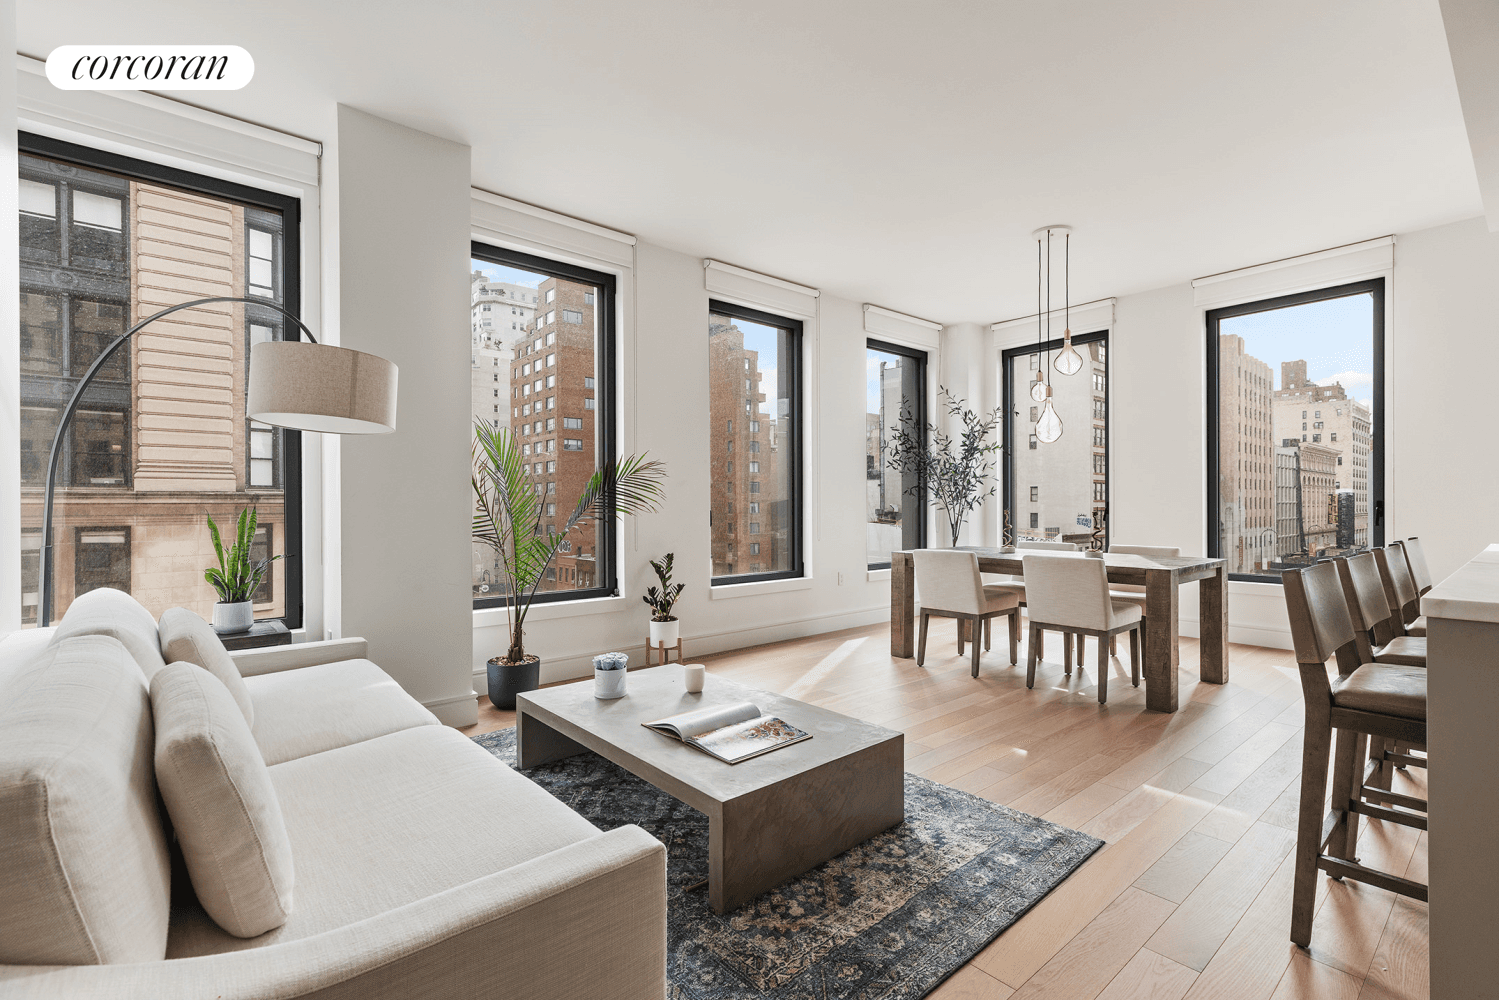 Welcome to Residence 5D at the upscale 540 Sixth Avenue a stunning 2 bedroom, 2 bathroom condo that boasts a delightful Southern and Western exposure.